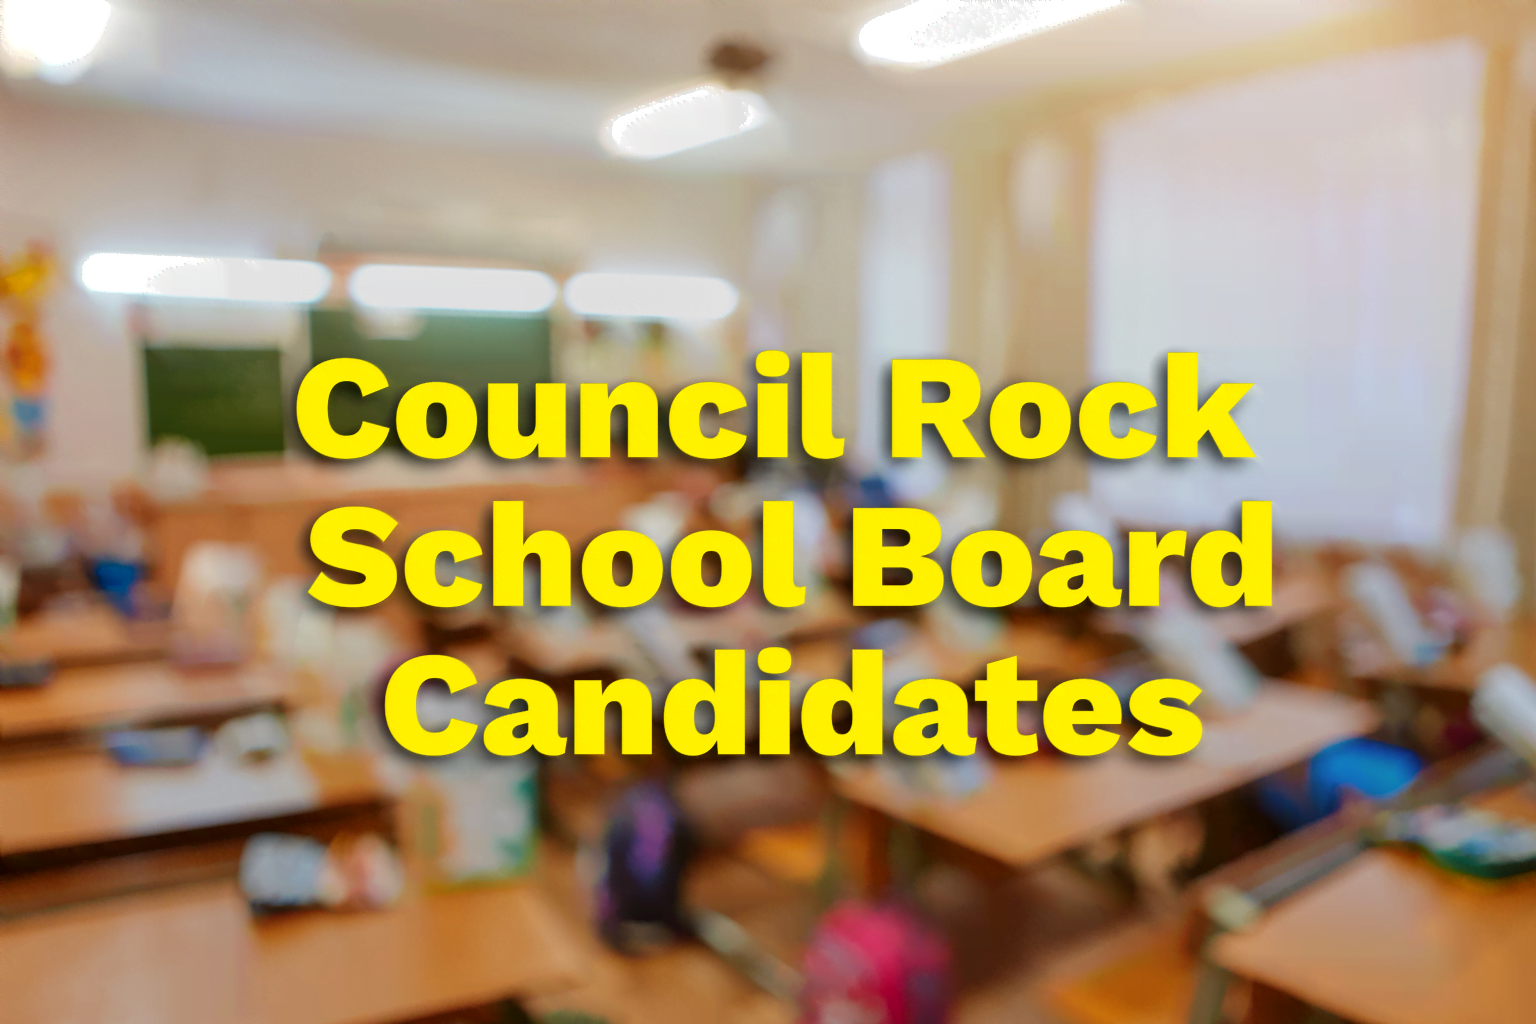 Together For Council Rock Announces Six Candidates For School Board